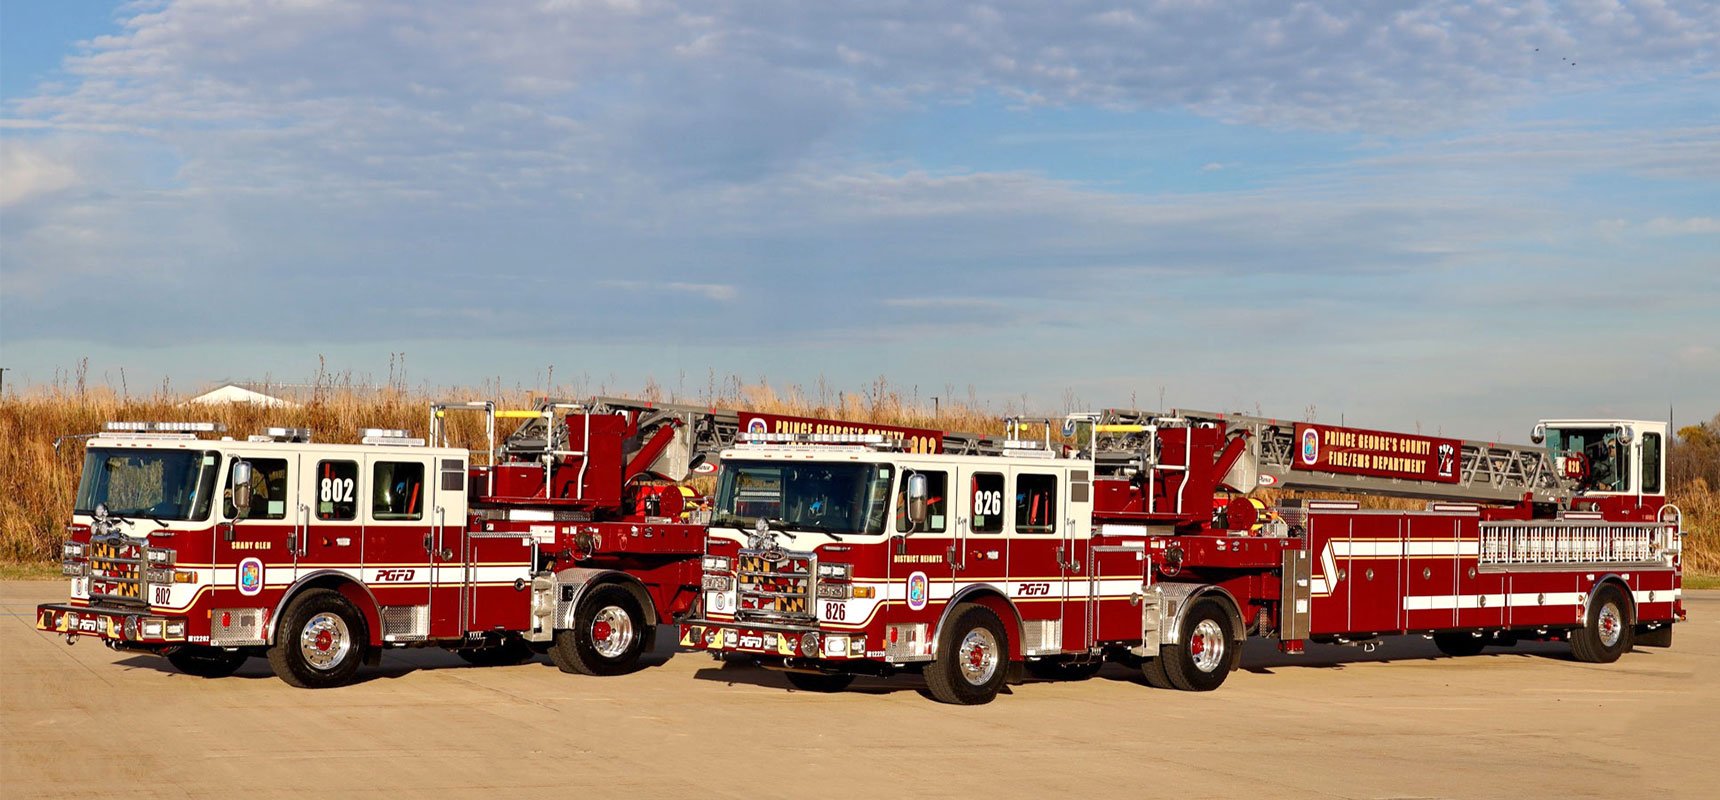 Prince George's County has ordered new Pierce fire apparatus